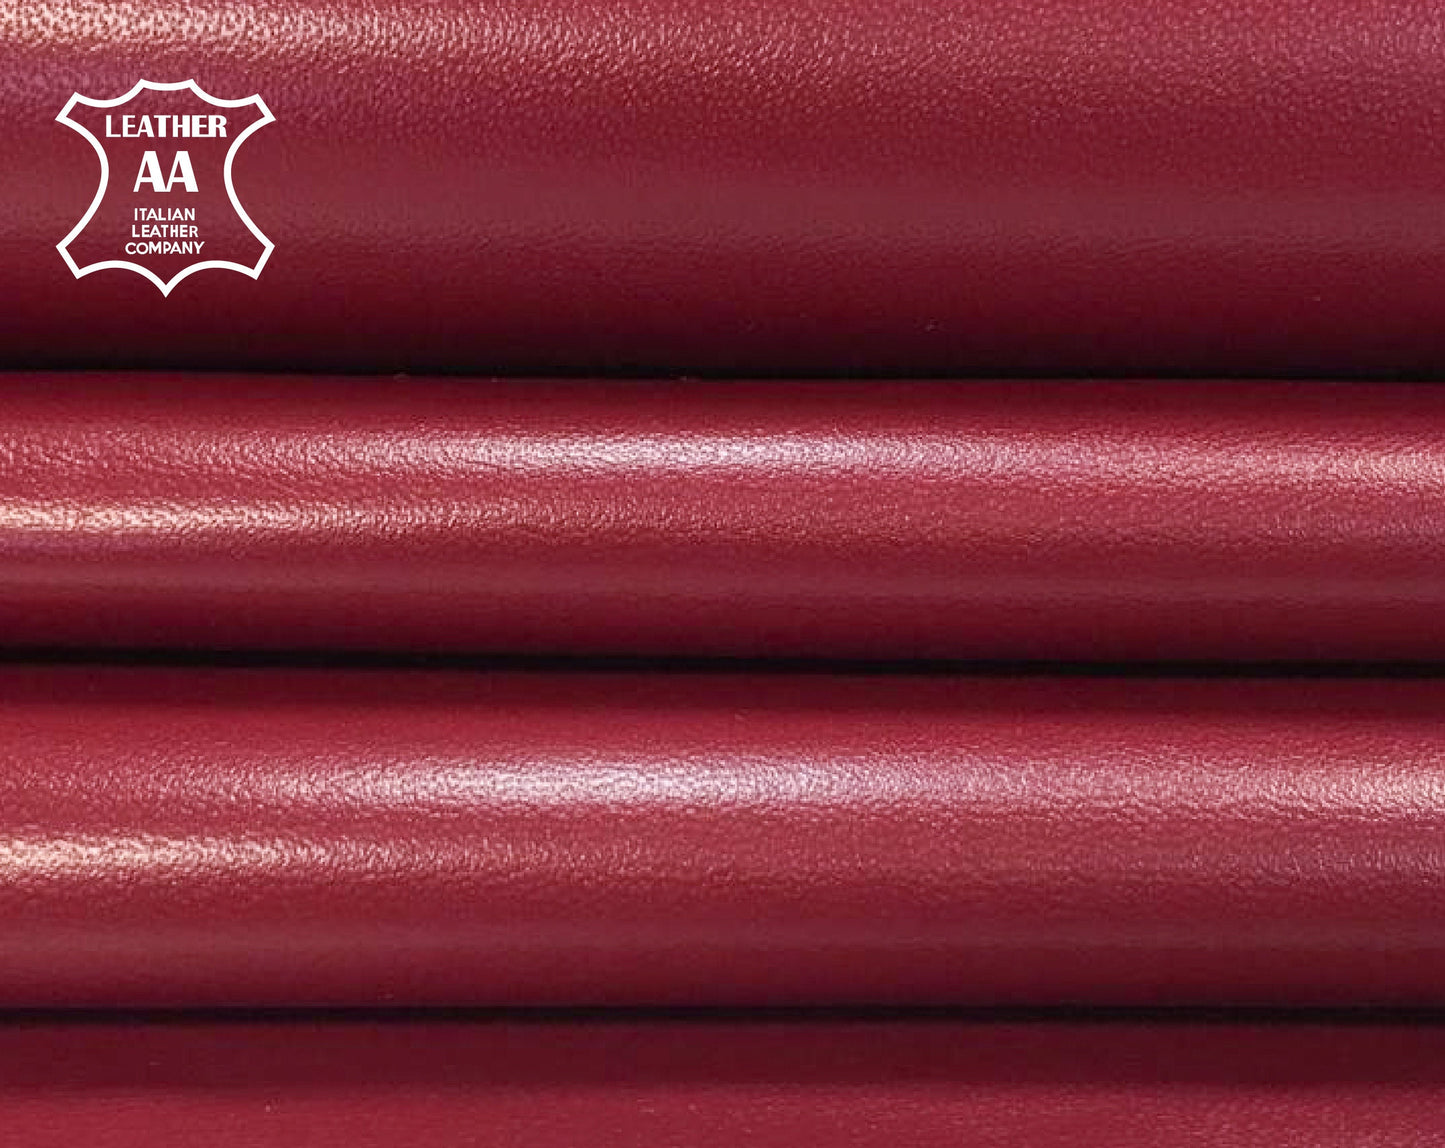 Burgundy Red Lambskin Leather 0.8mm/2oz / RIO RED 299